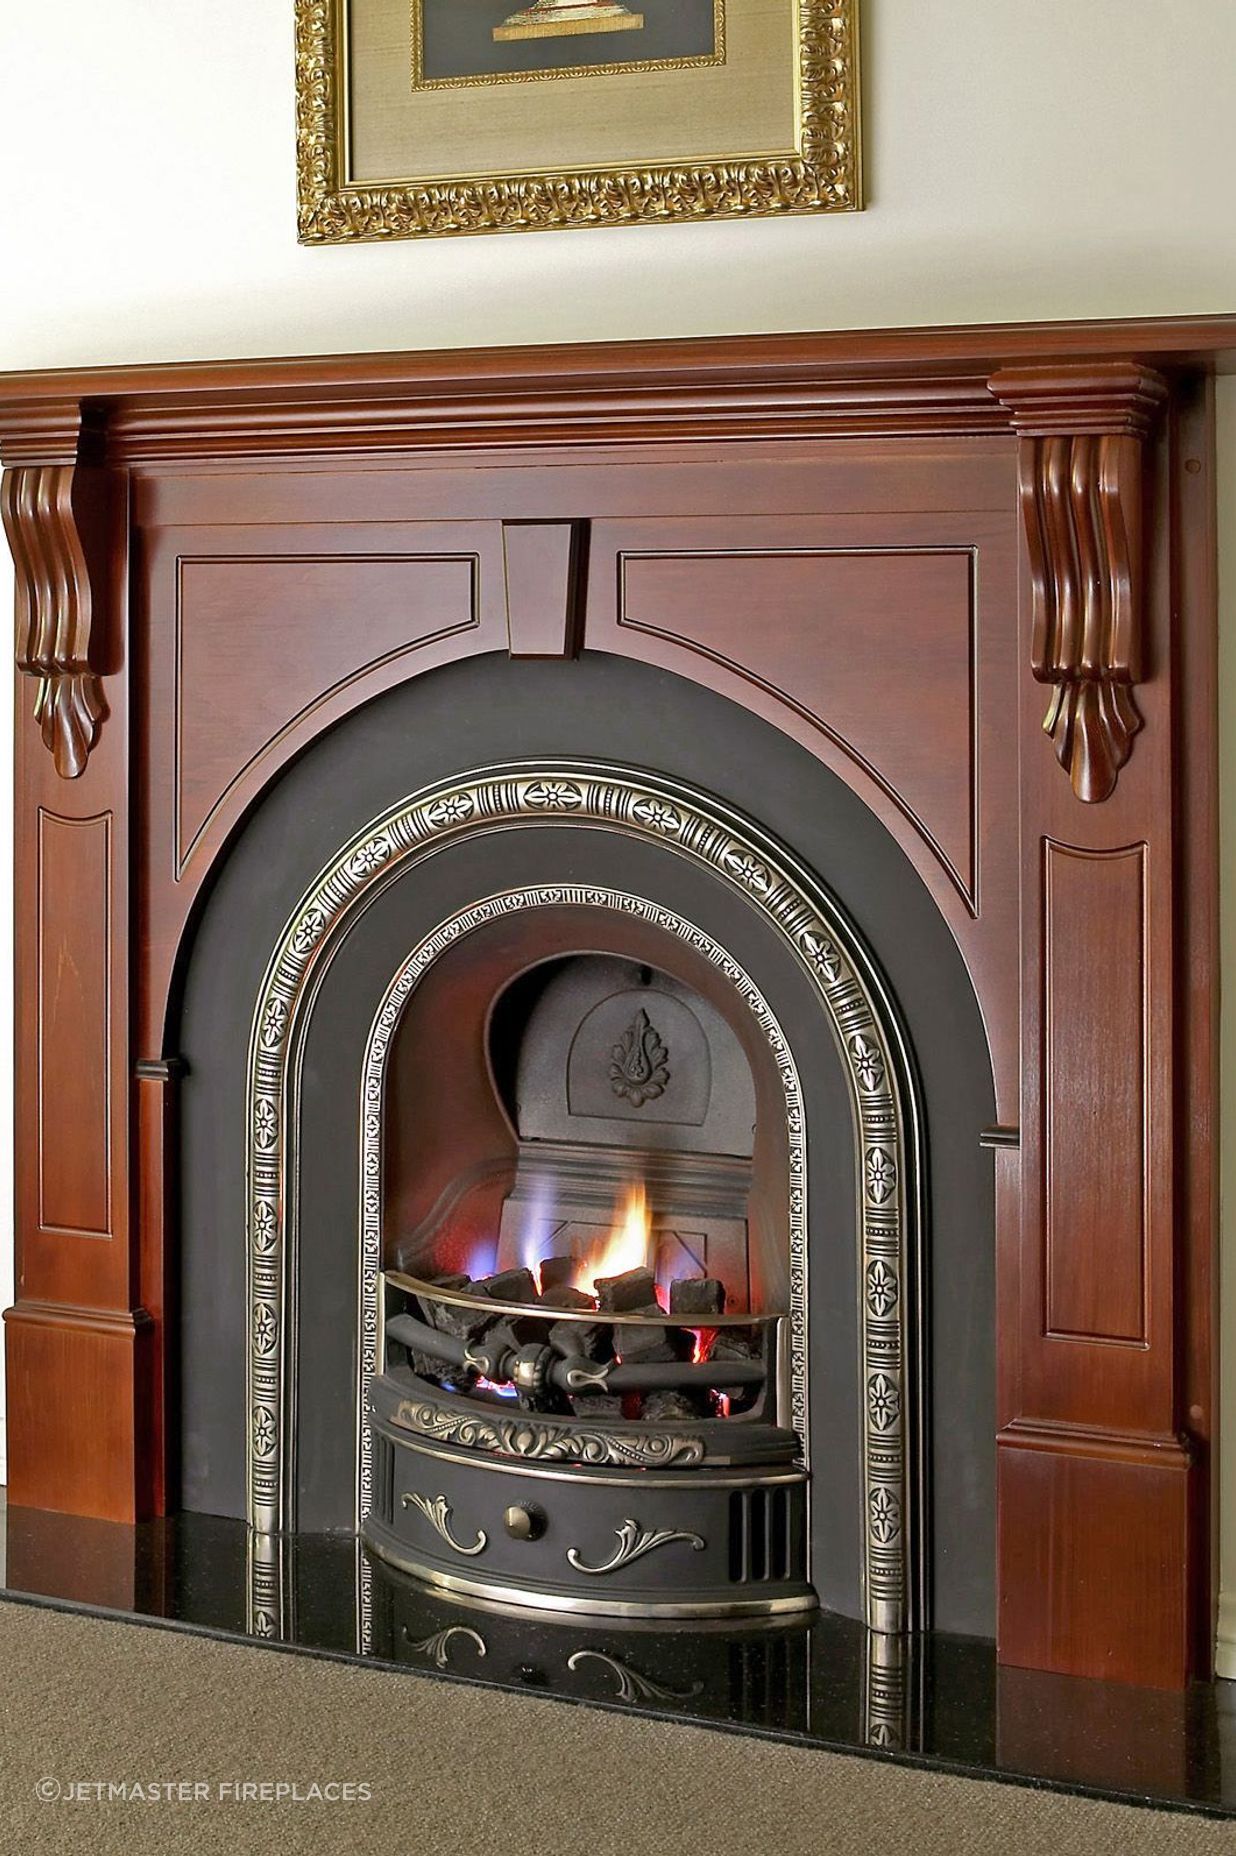 Gas fireplaces, such as the Federation 300 Gas Burner, are well suited to traditional and heritage homes.